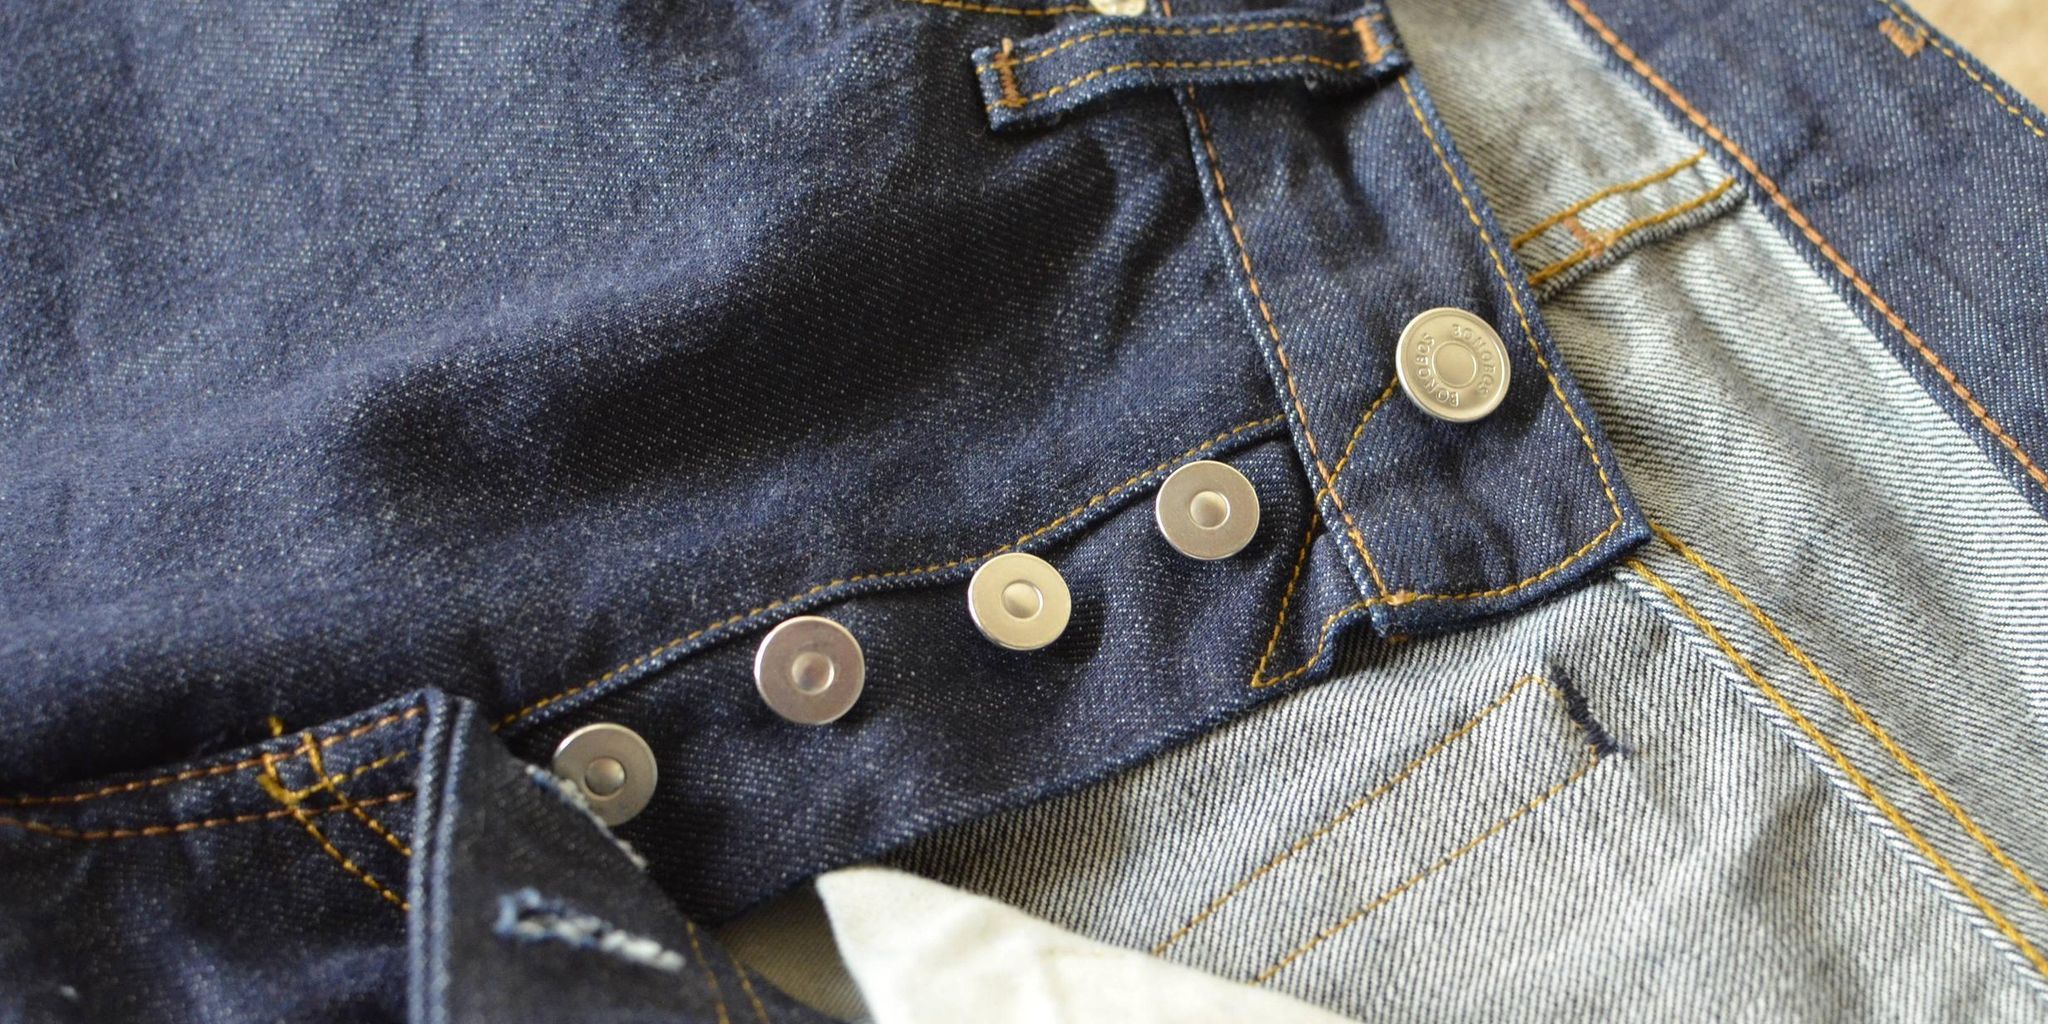 jeans with buttons instead of zipper